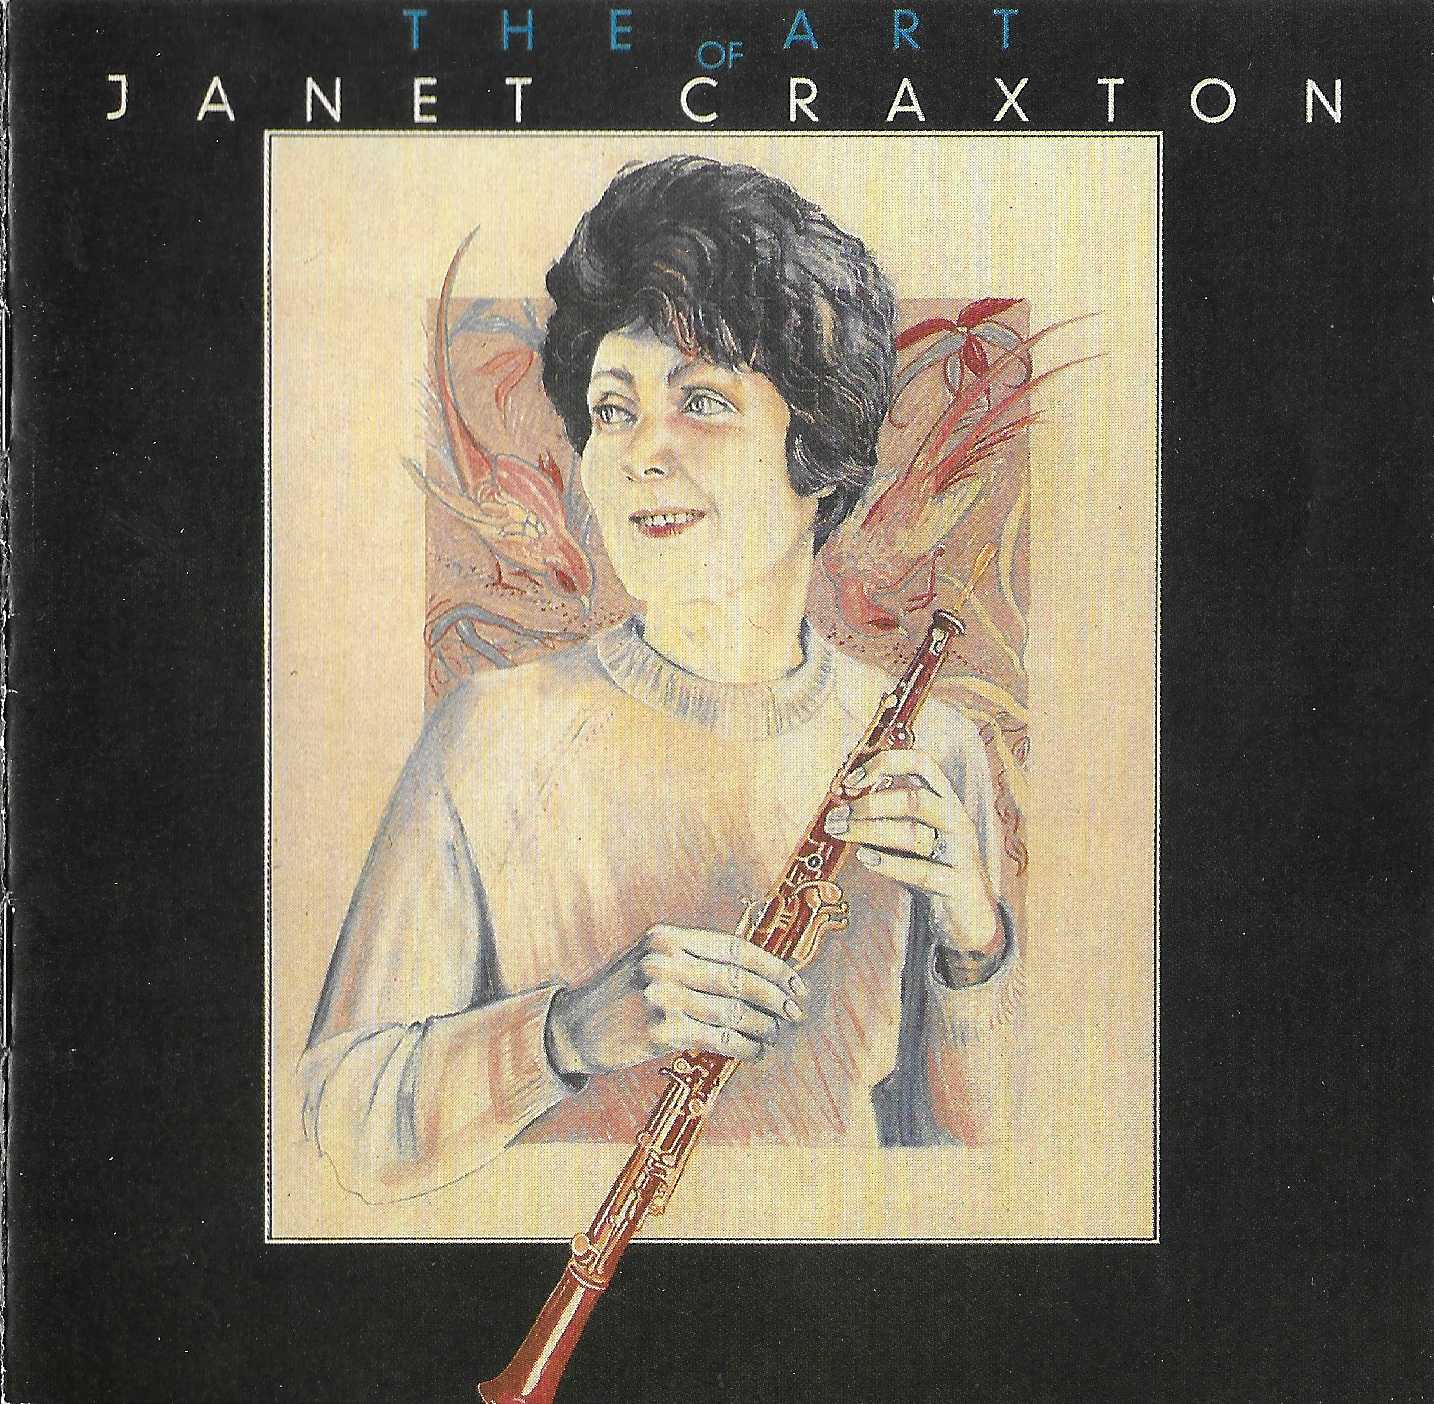 Picture of BBCCD635 The art of Janet Craxton by artist Janet Craxton from the BBC cds - Records and Tapes library